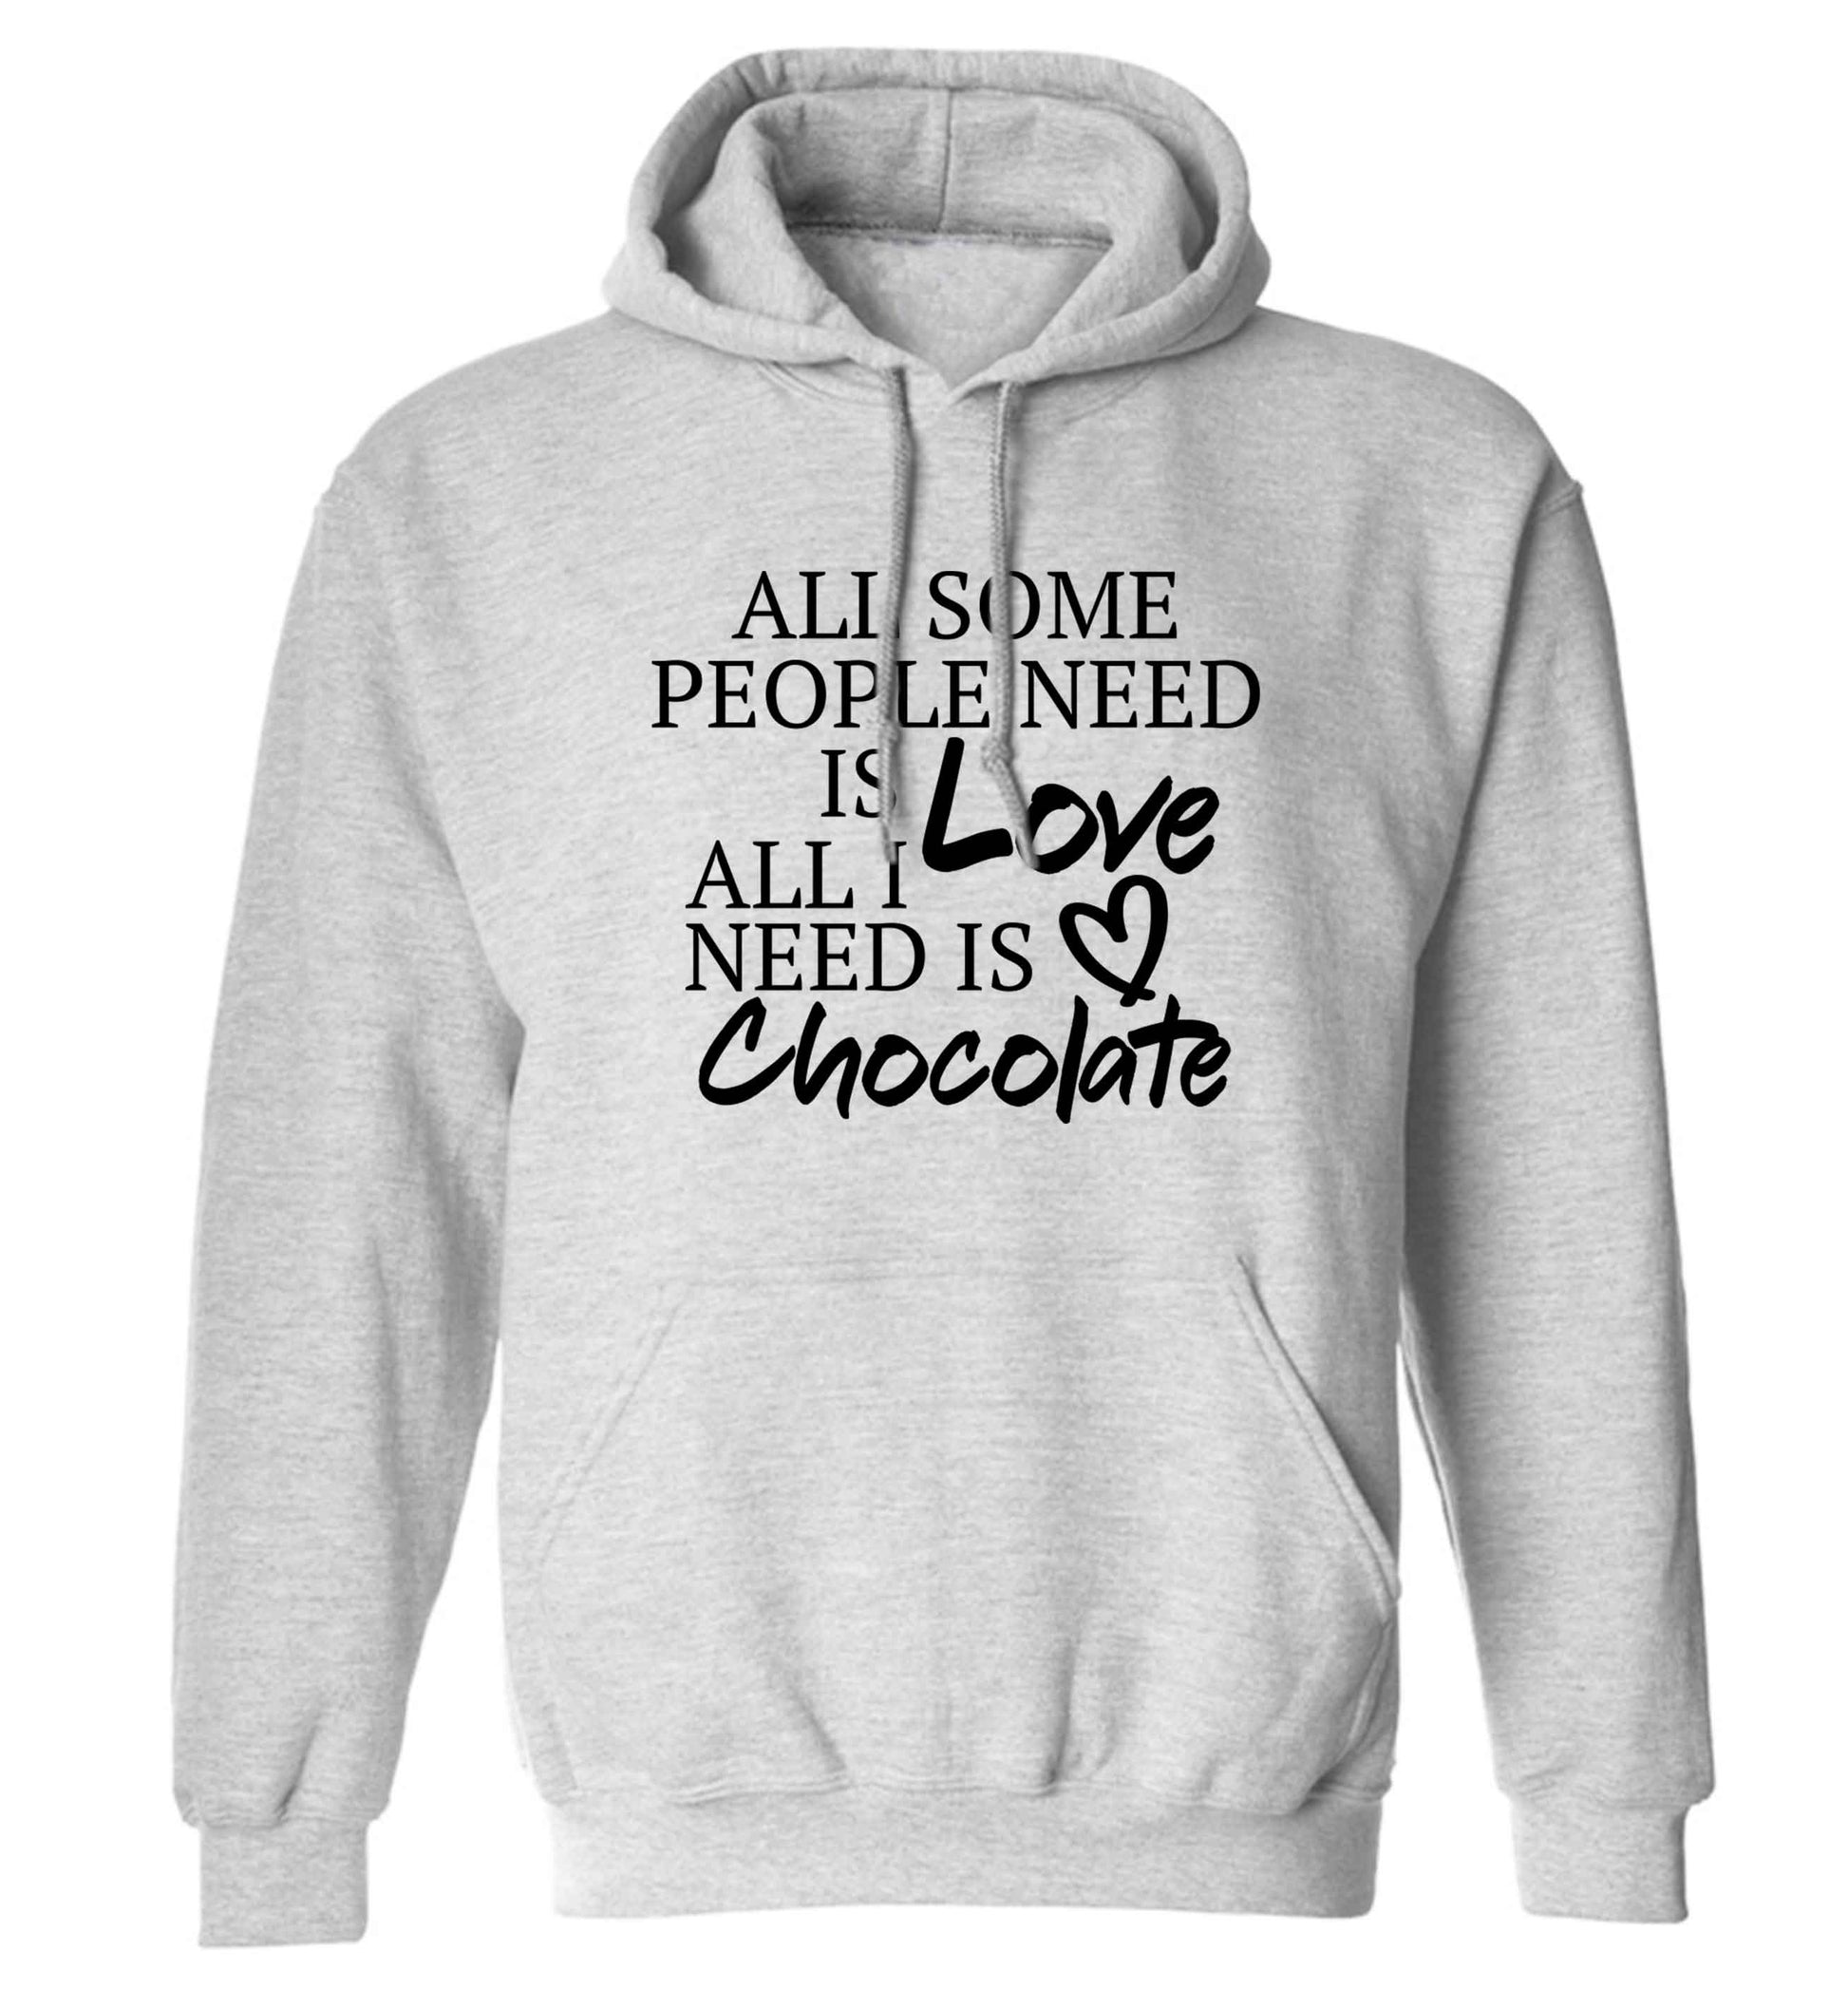 All some people need is love all I need is chocolate adults unisex grey hoodie 2XL